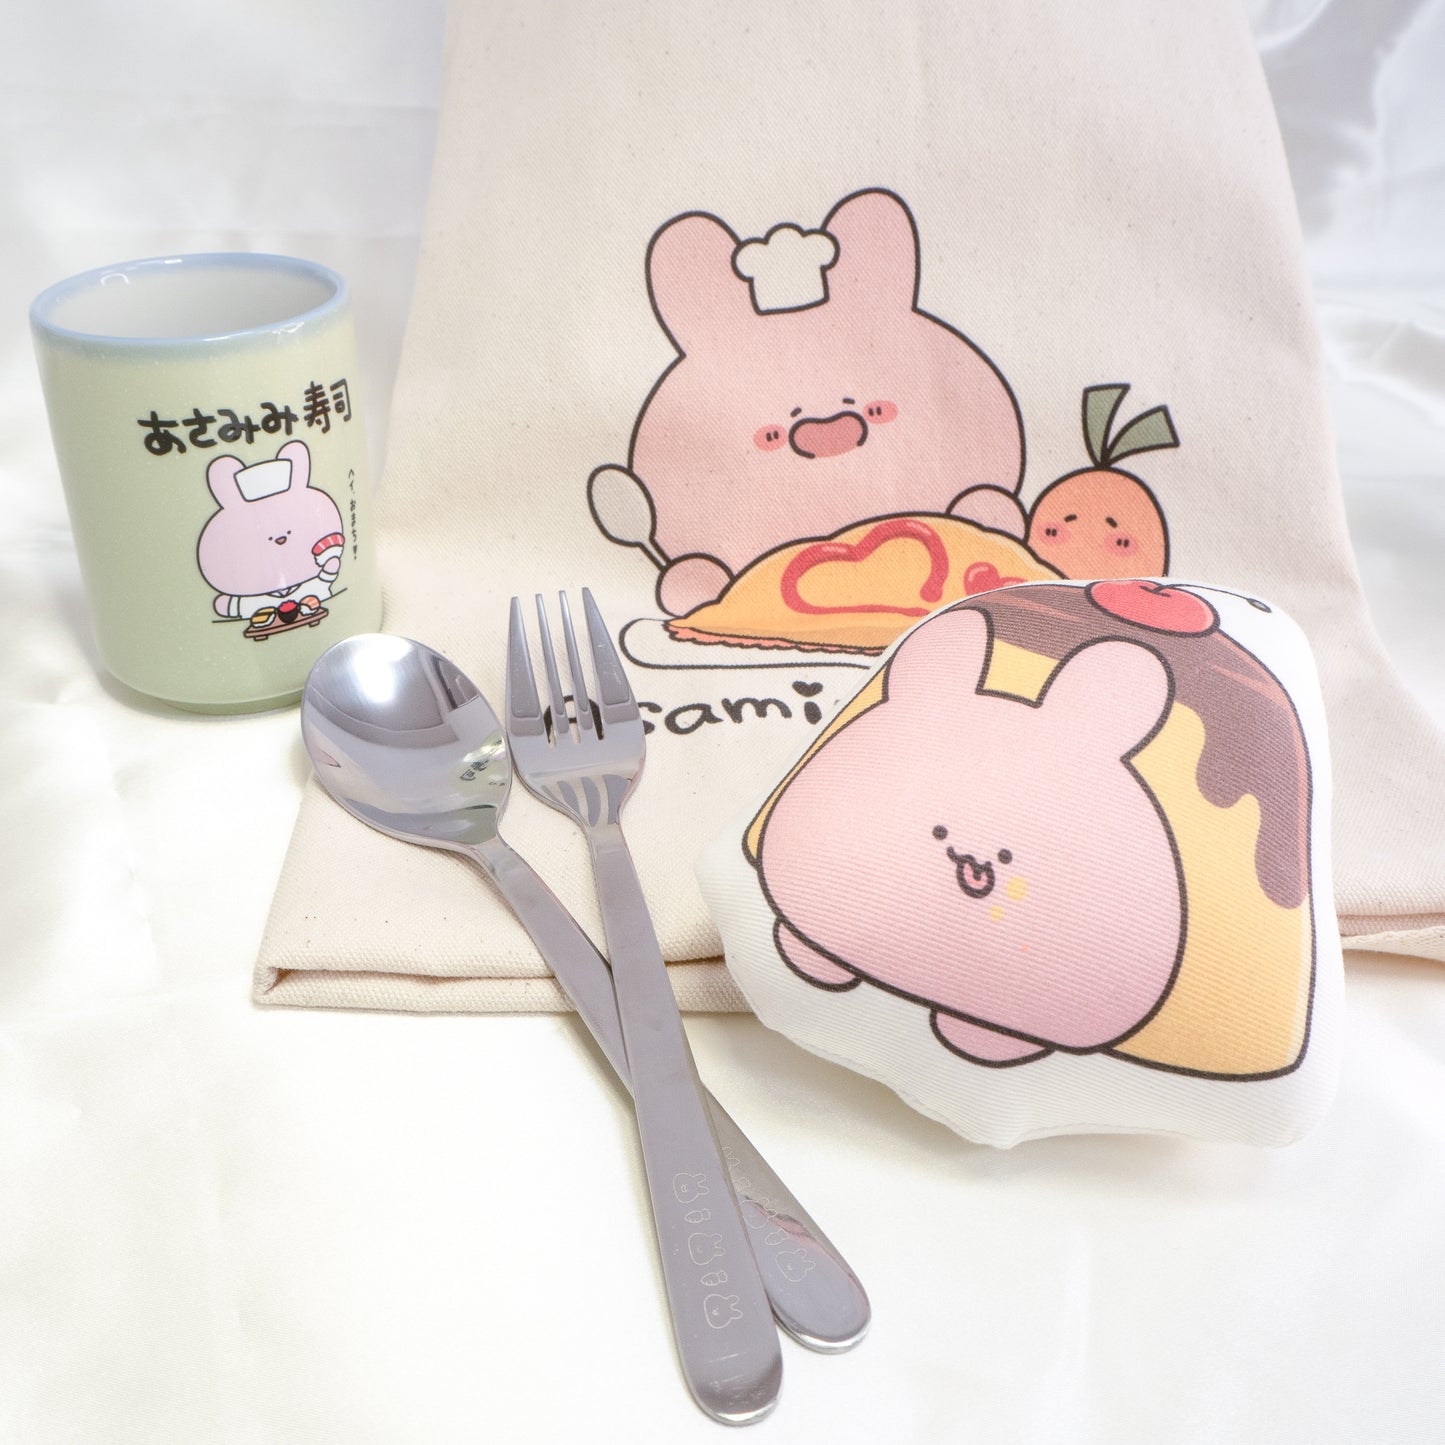 [Asamimi-chan] Stainless steel fork [shipped in mid-August]